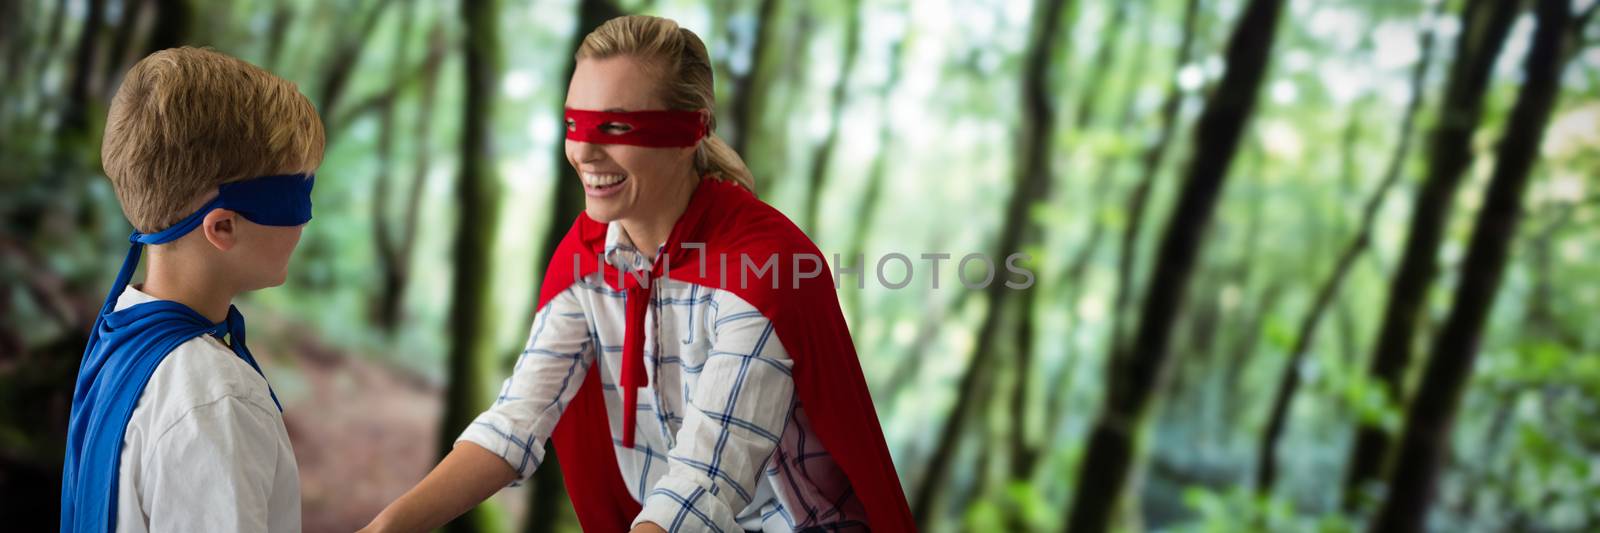 Mother and son pretending to be superhero against tree trunks in forest